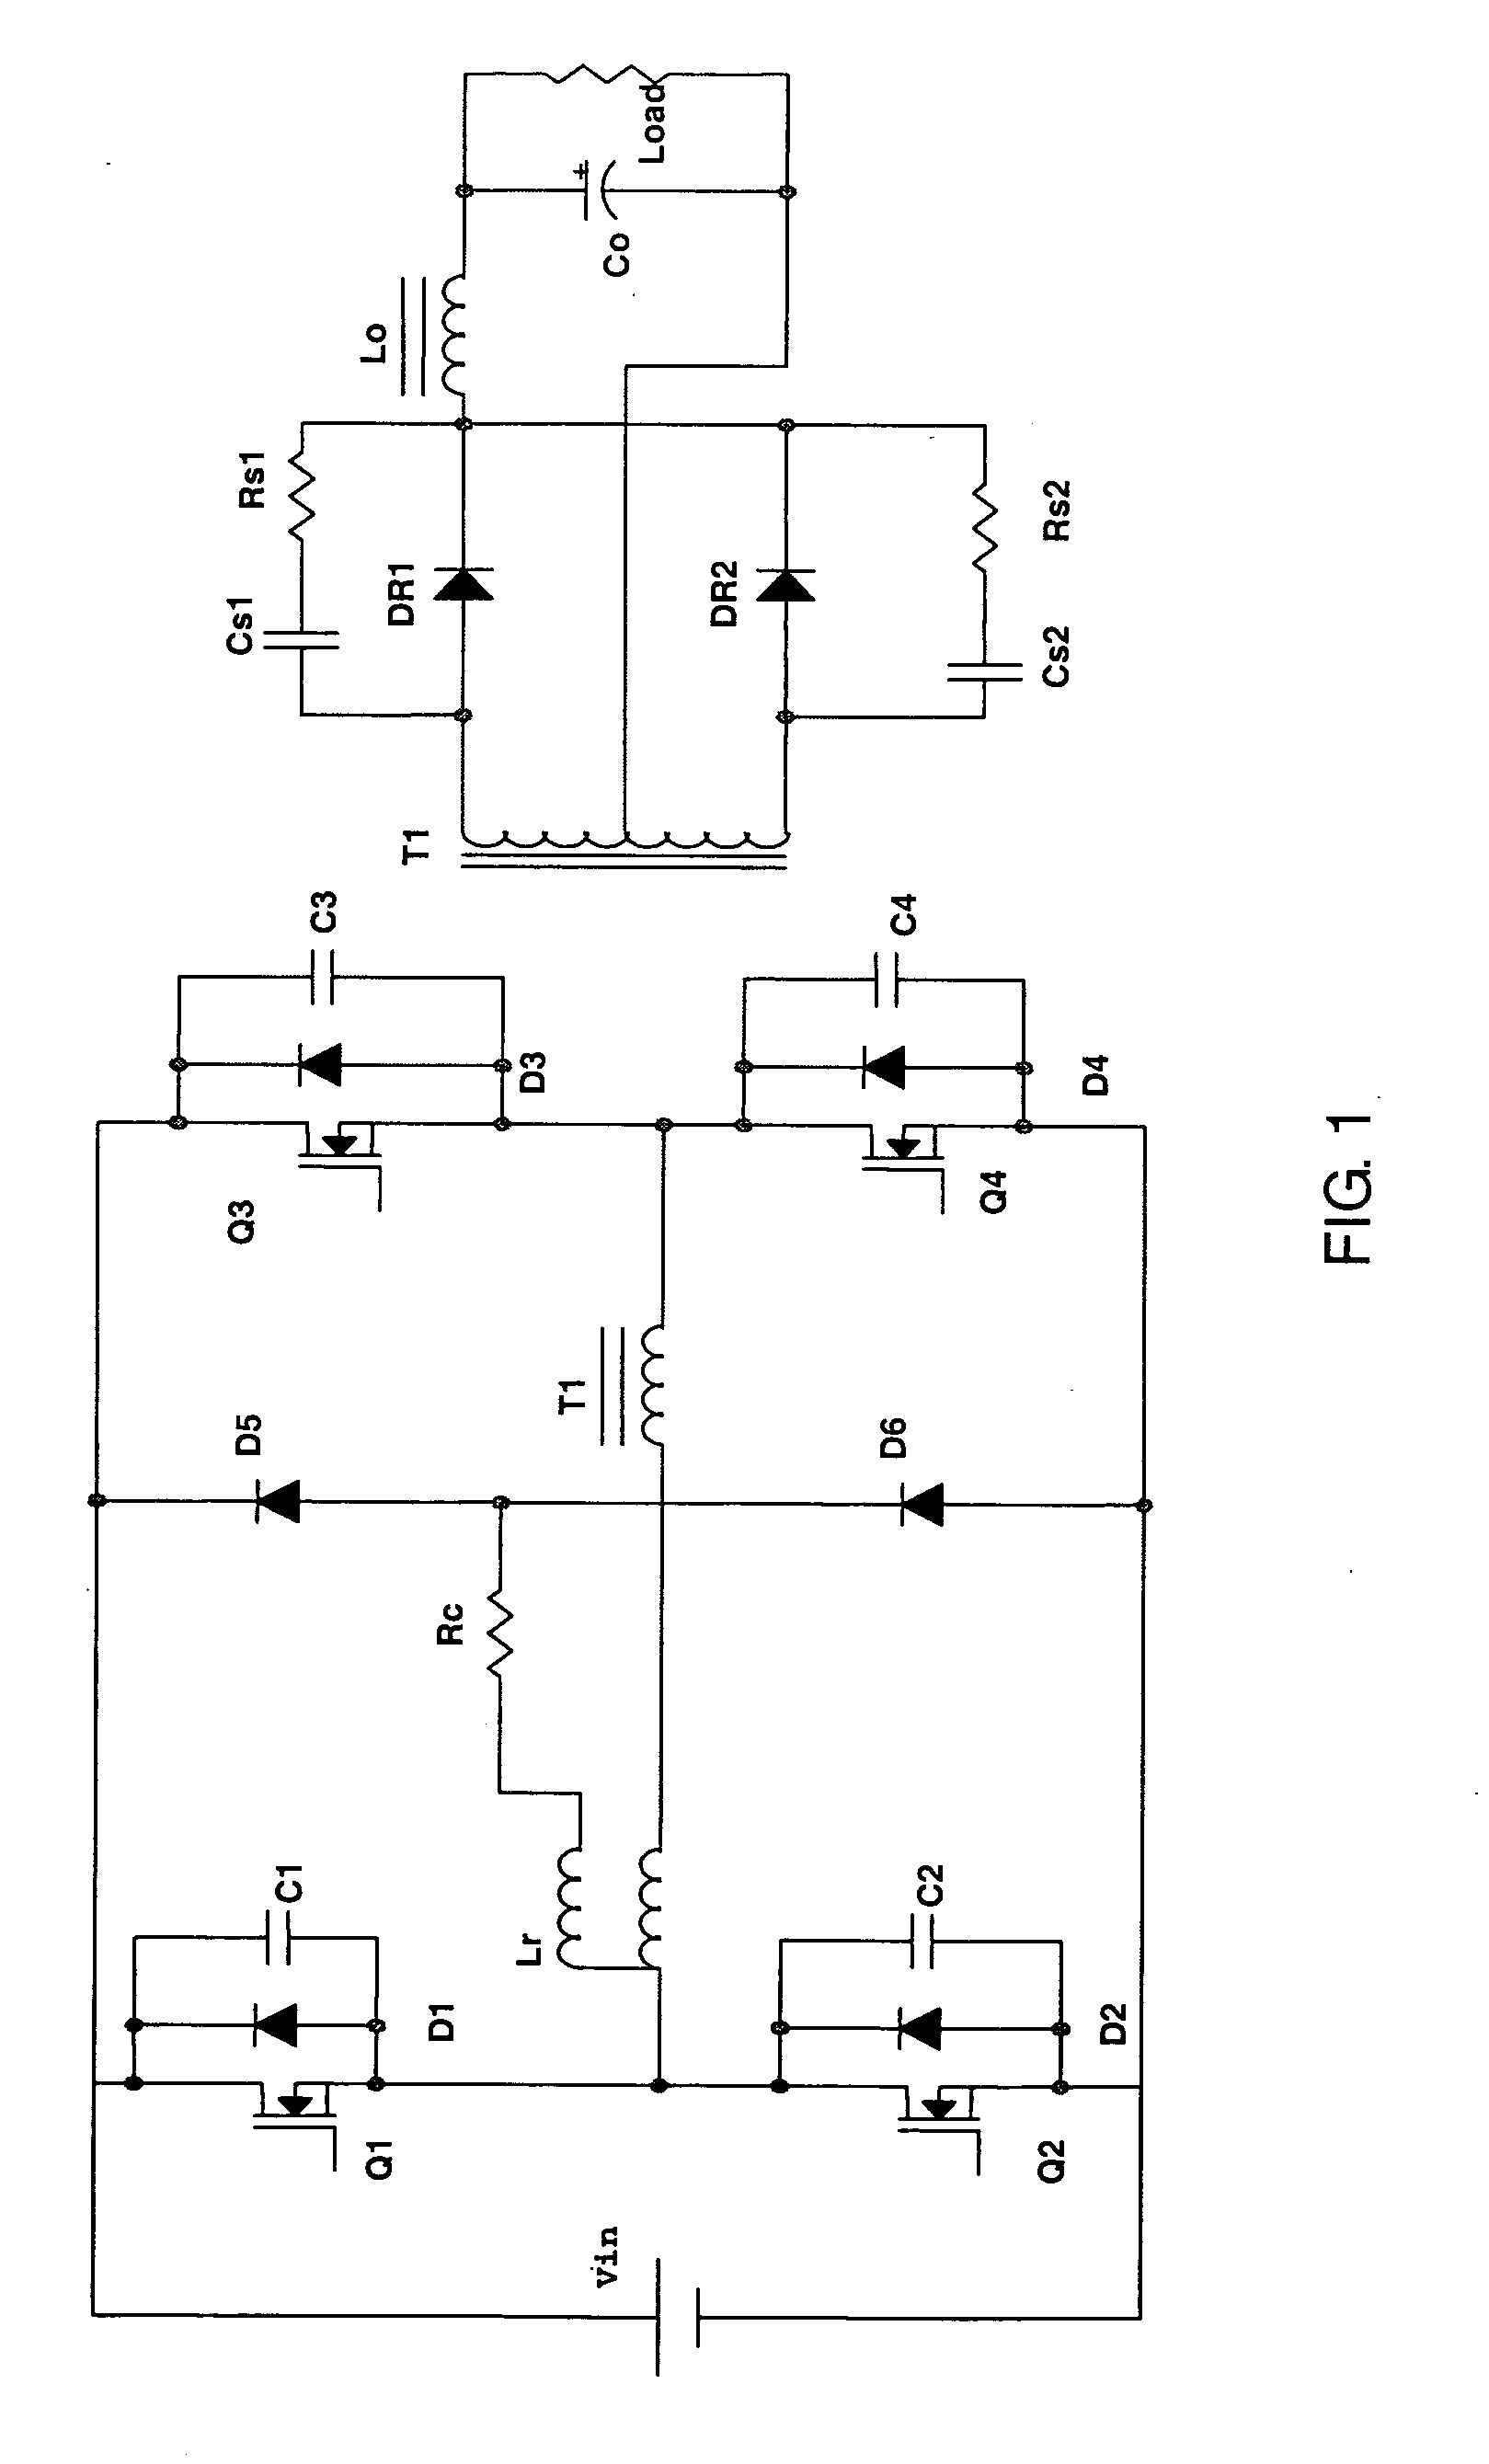 Inductance-voltage clamping full-bridge soft-switch circuit